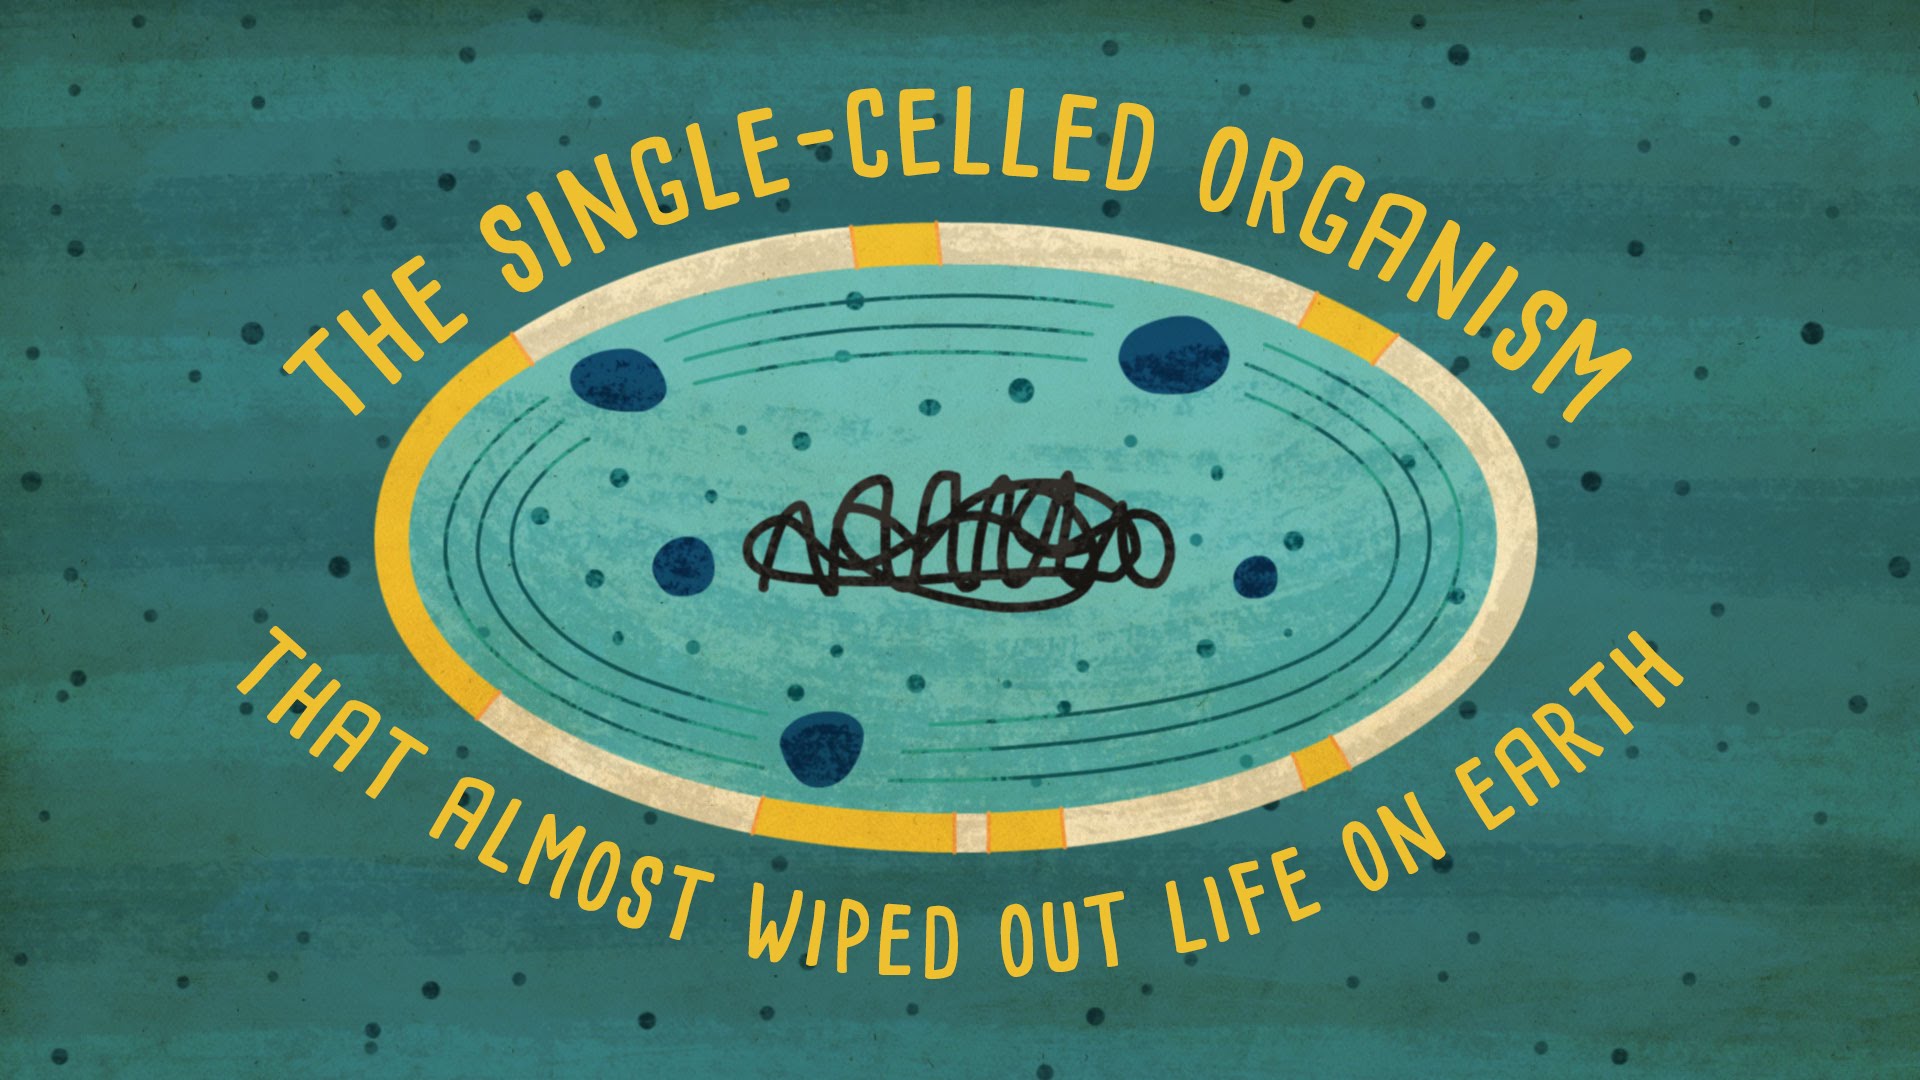 Life on Earth: reimagined. Wipe out the Planet. Cute Single Celled Organism.